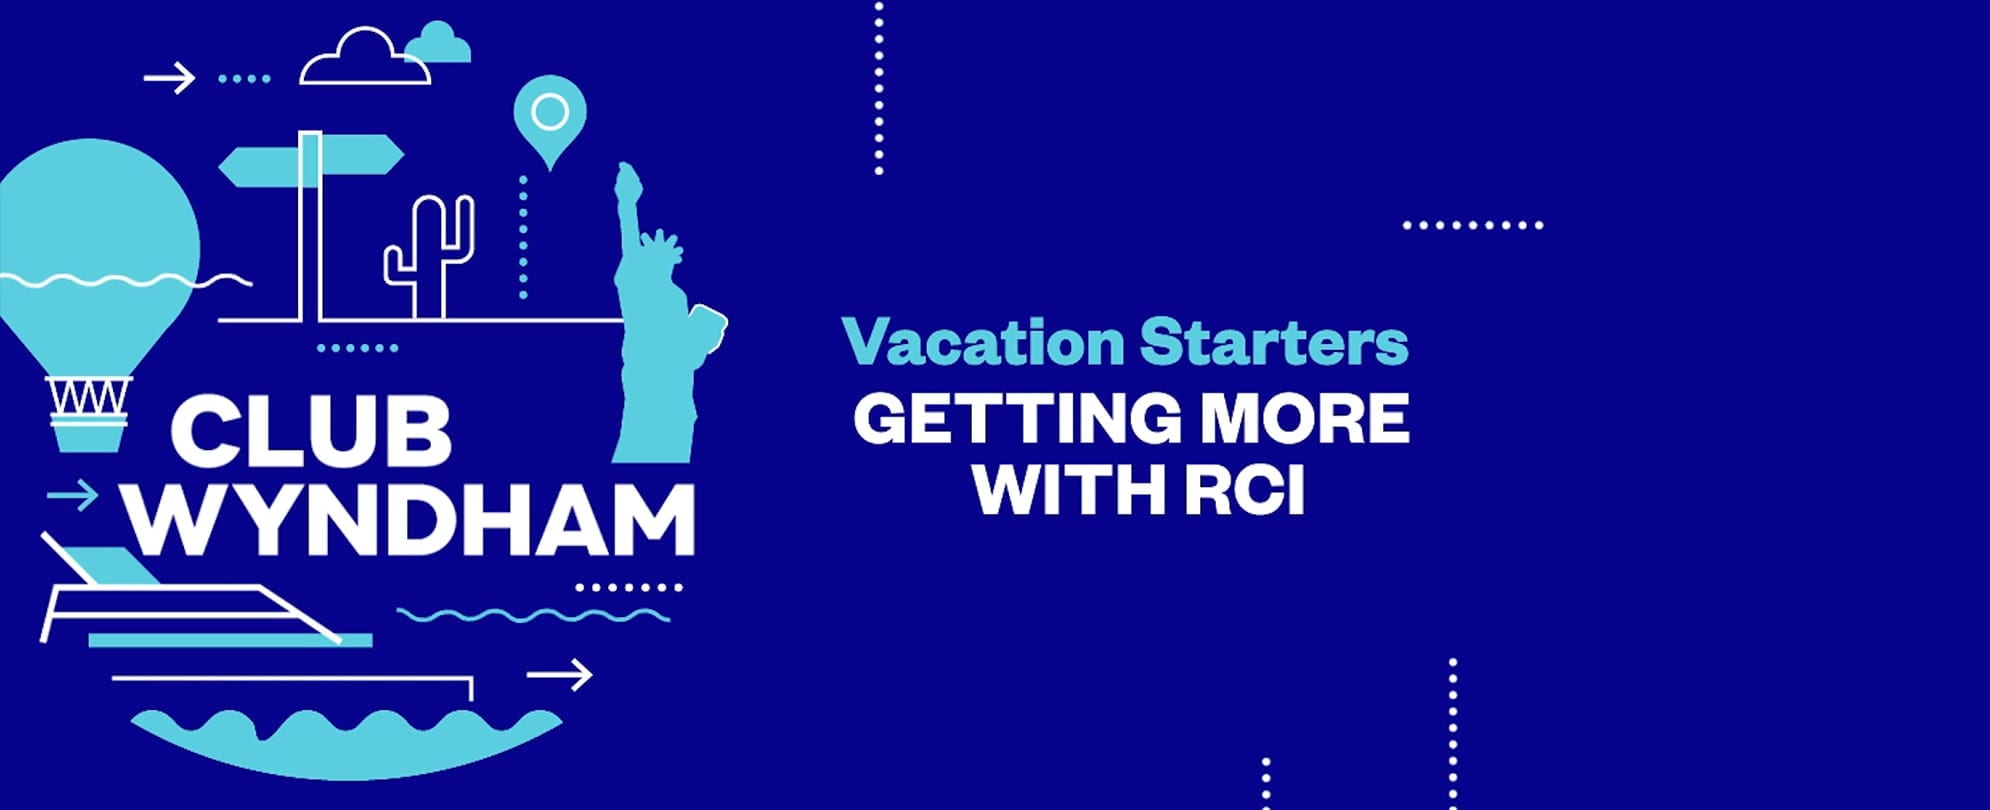 Getting More with RCI overview from the Club Wyndham Vacation Starters video series